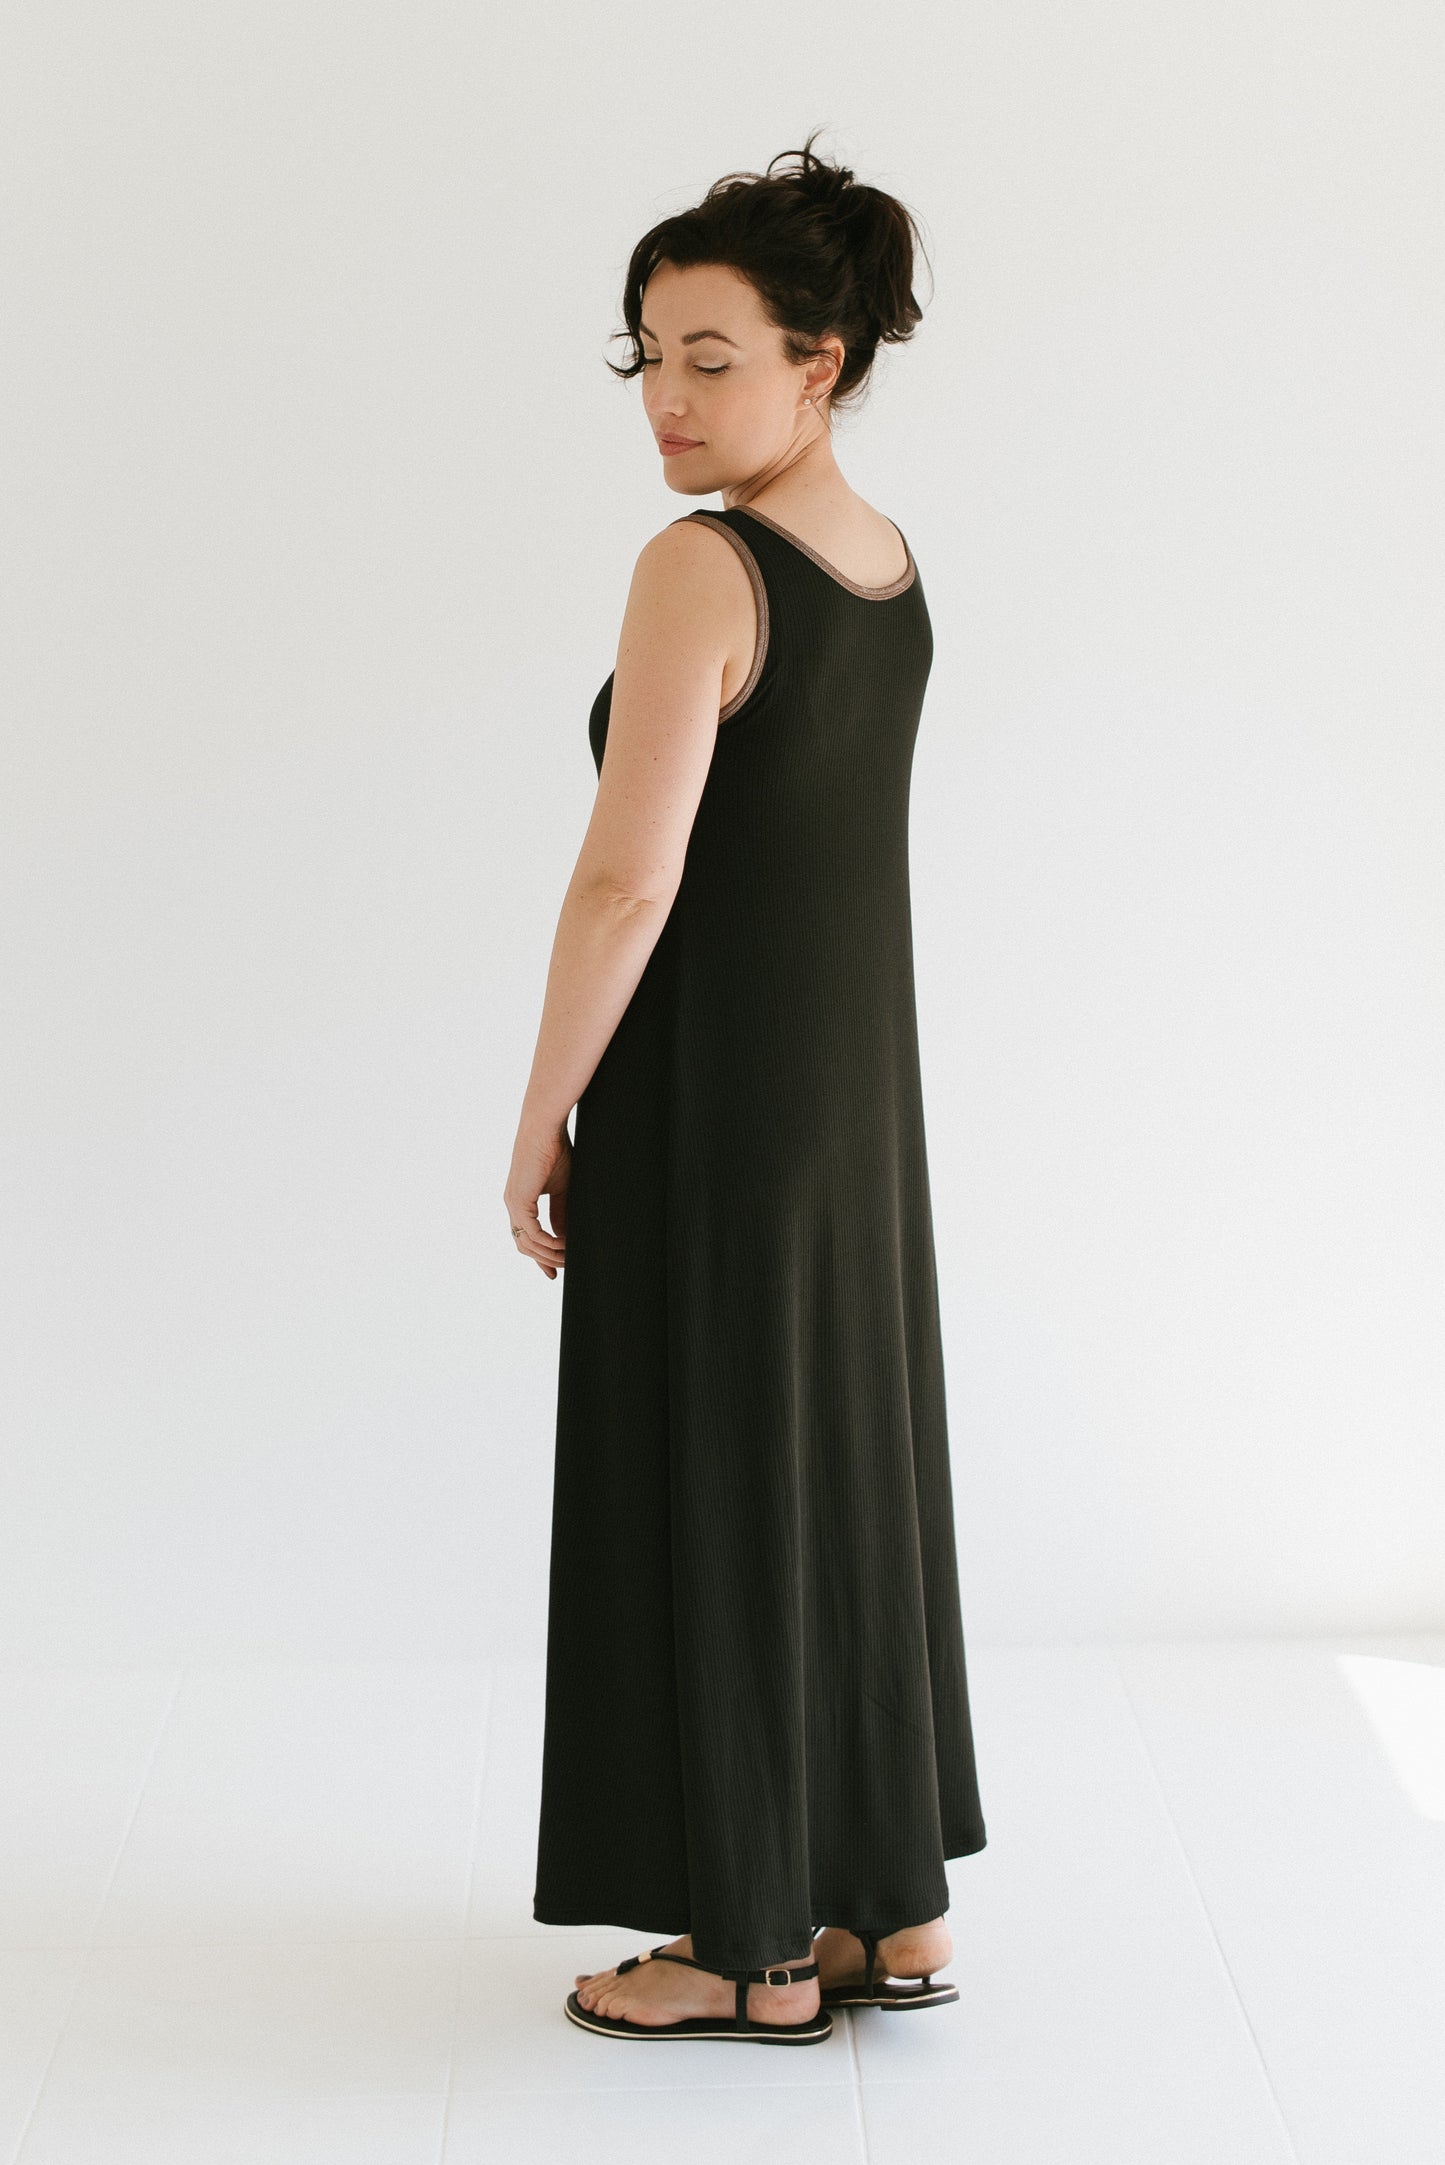 The Anneen Henze Gina Rib Dress is your everyday staple item this season, that can be dressed up and down, fitting for every occasions. You can wear the dress with the high neck in front or turn around for a lower neck style. Designed with an A-line silhouette for a flattering fit and can also we worn with a belt to create a pulled in waist detail.